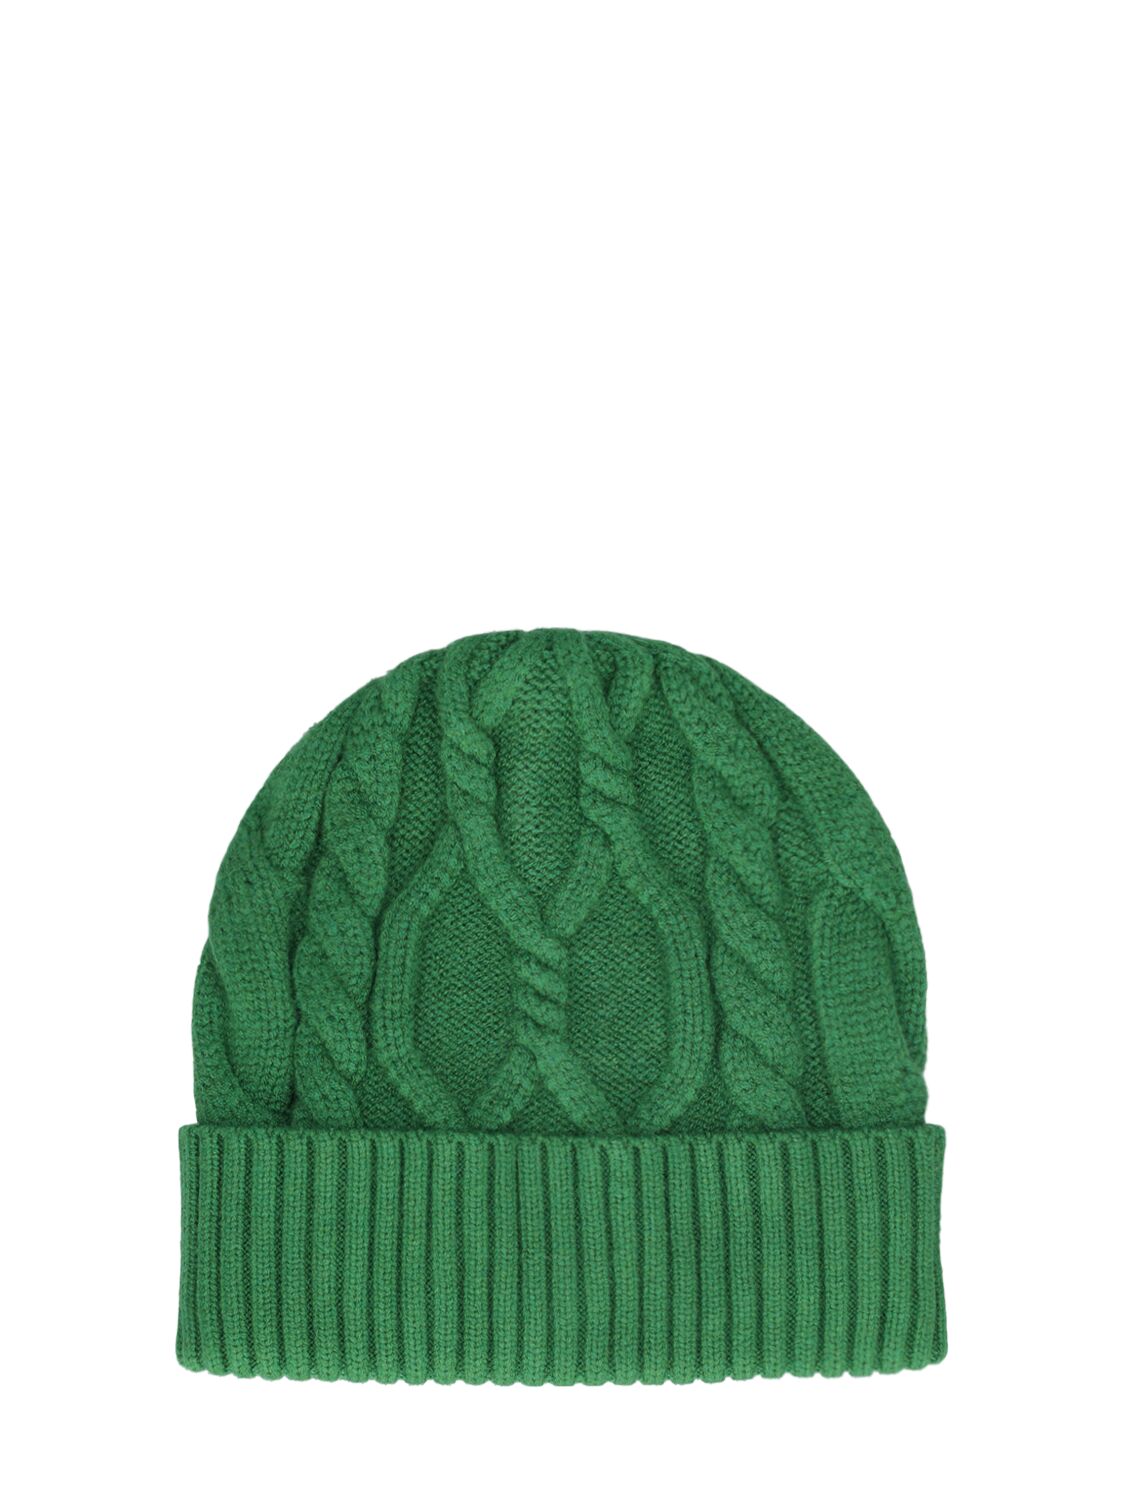 Varley Chamond Cable Knit Beanie In Green